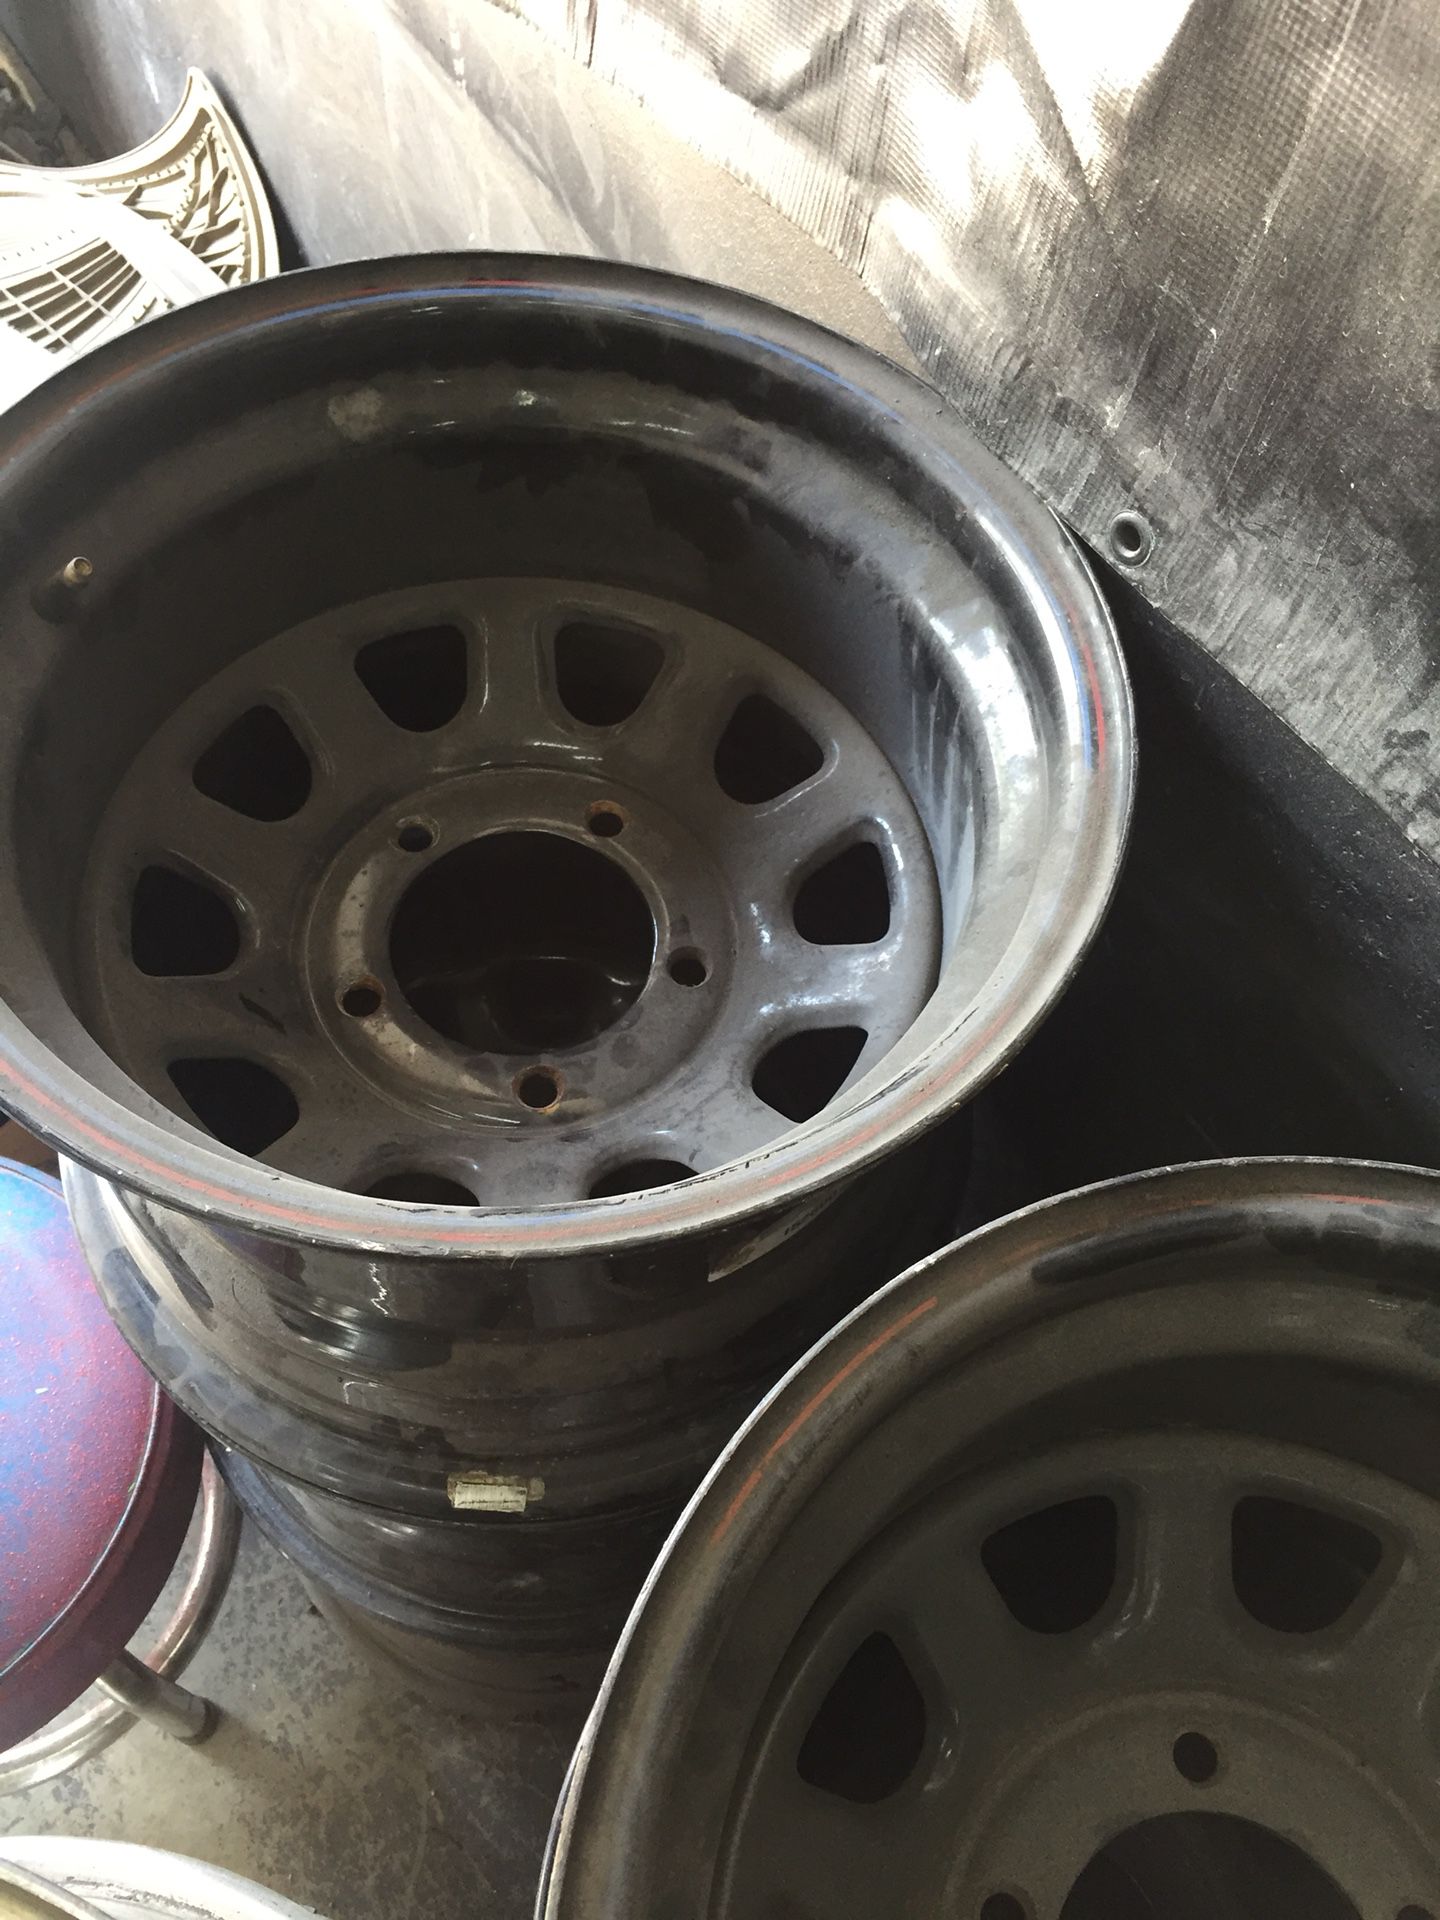 Jeep cj wheels 15 x12. Come and see them I have 3 sets